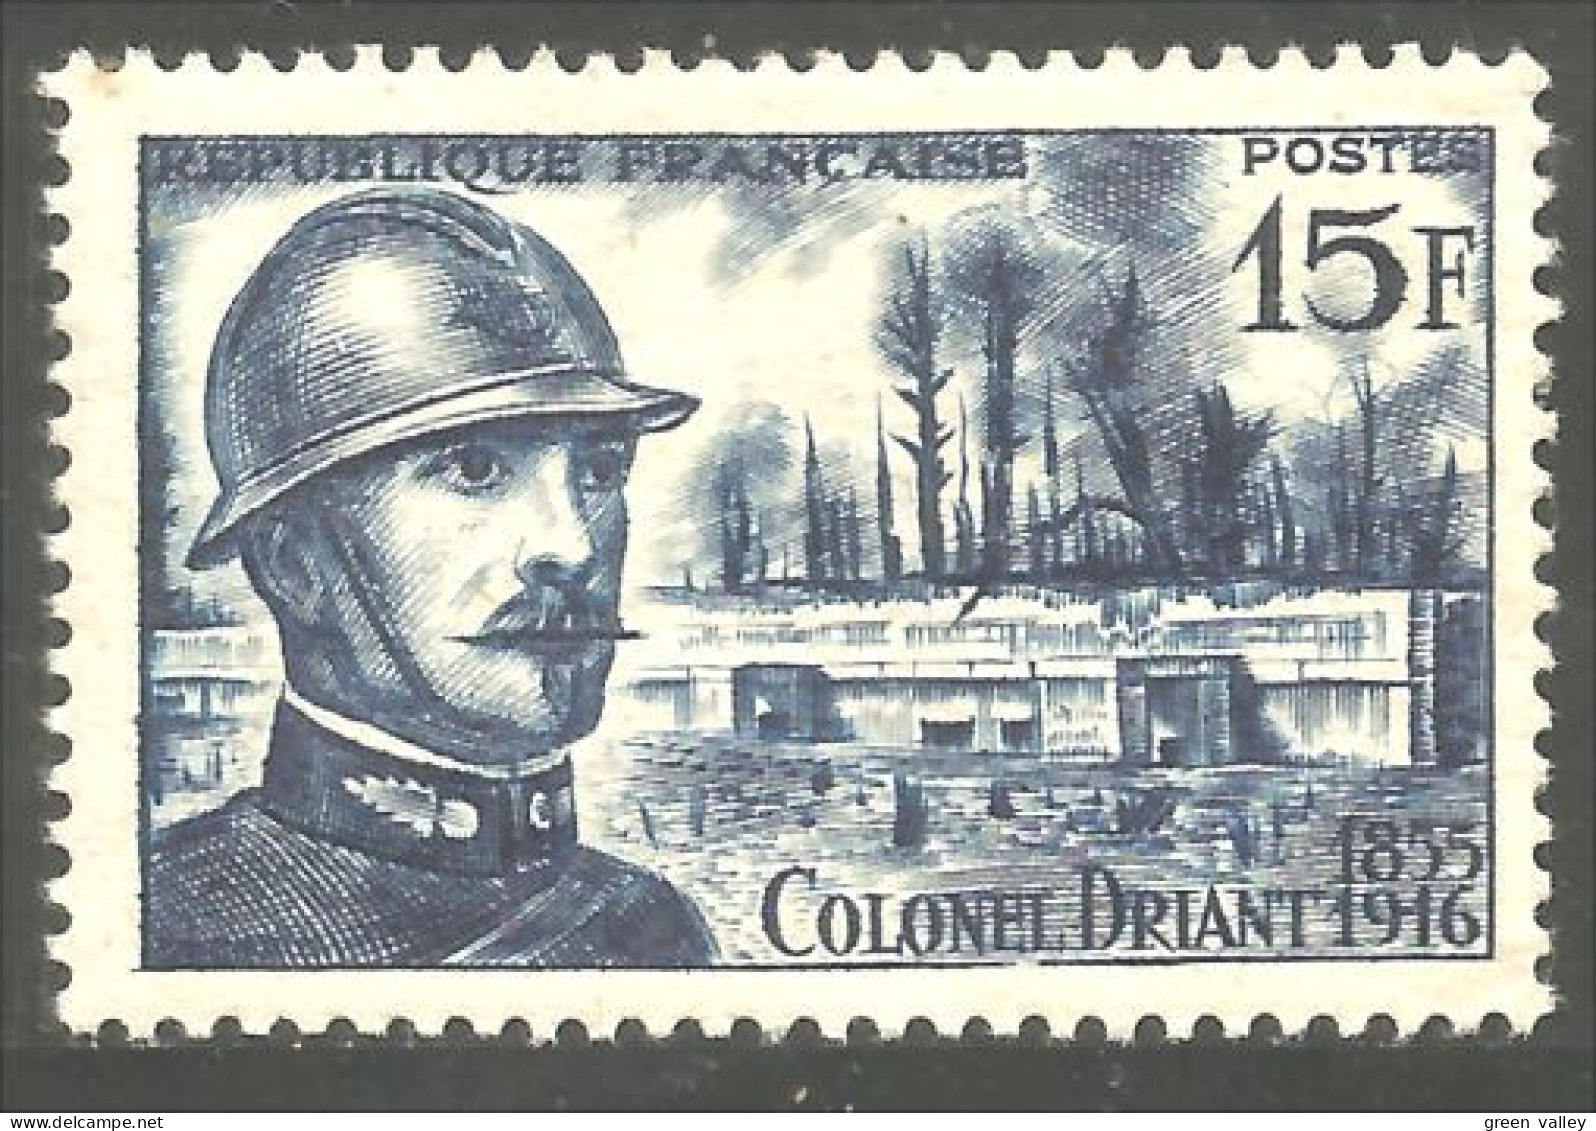 340 France Yv 1052 Colonel Driant 1916 Guerre War WWI MNH ** Neuf SC (1052-1c) - 1. Weltkrieg